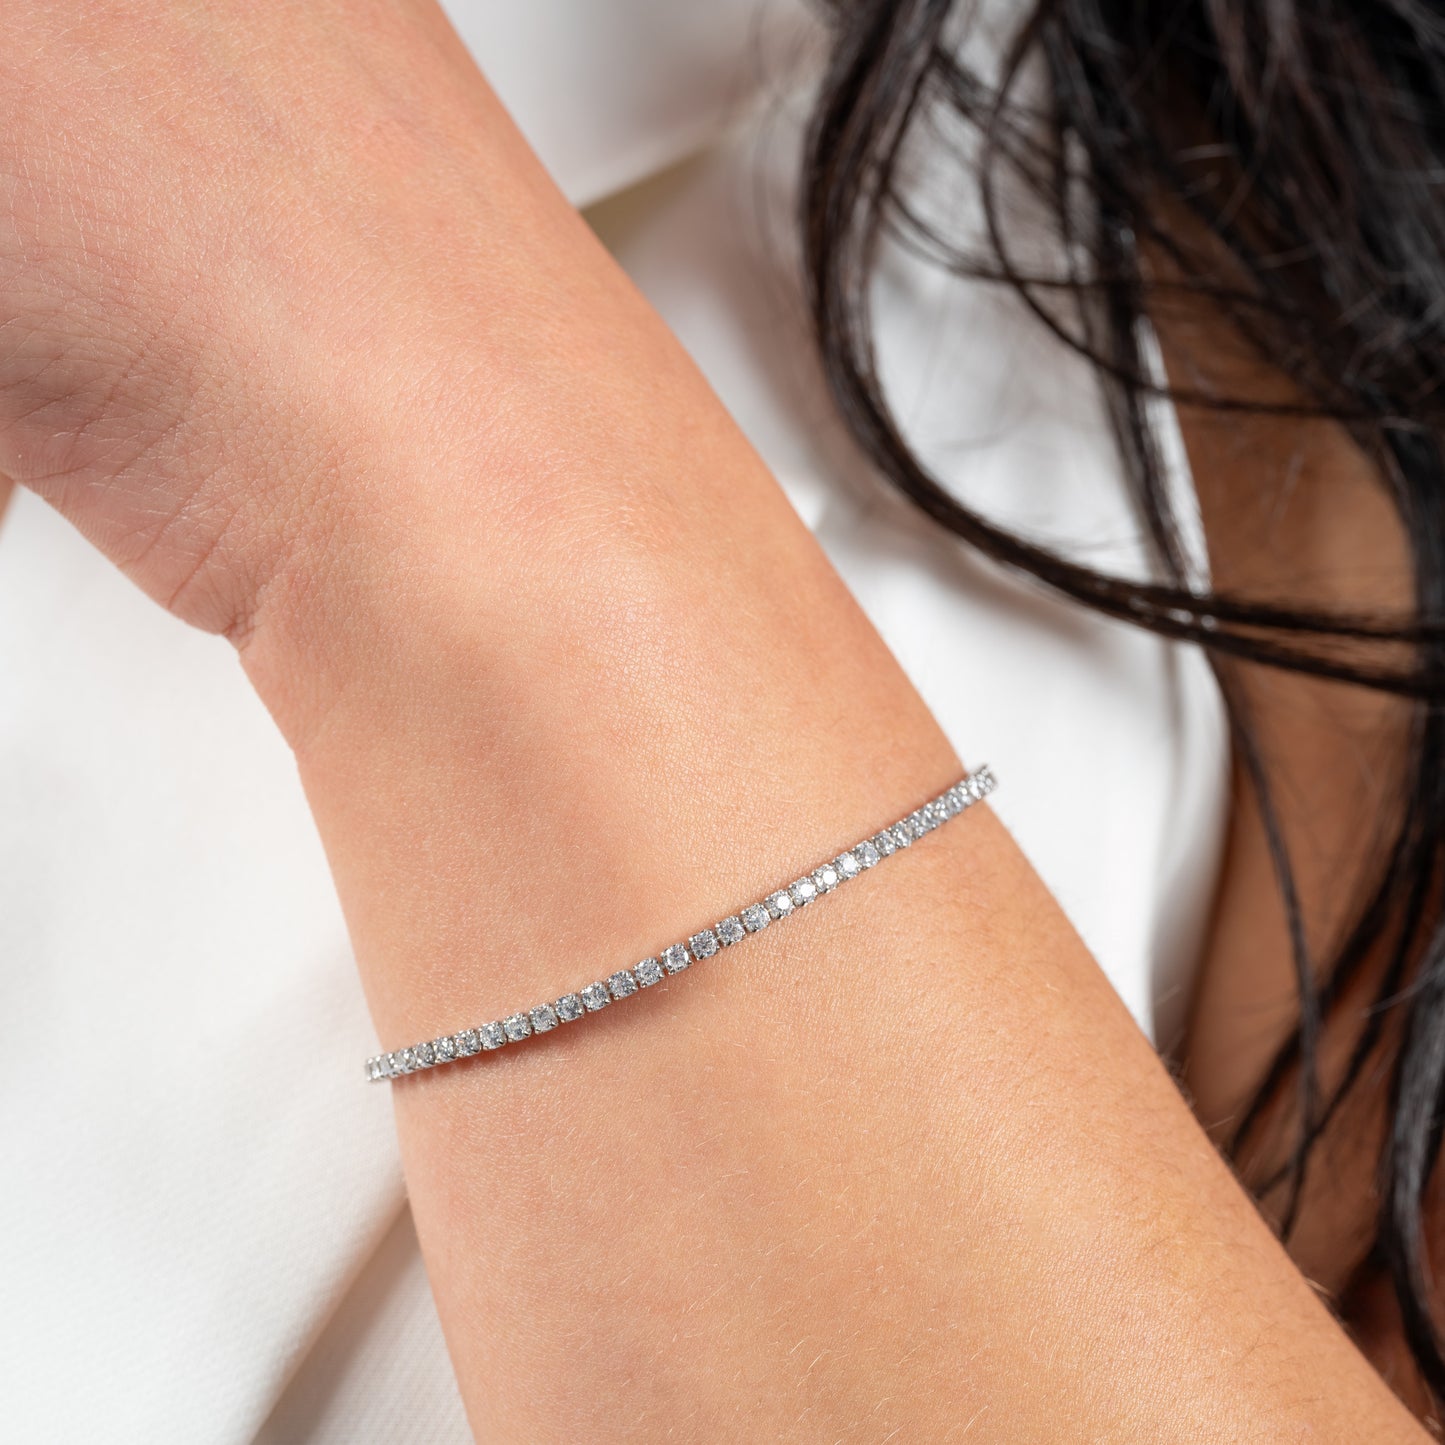 A model wearing Tennis CZ Silver Bracelet on her hand. Zoomed view.